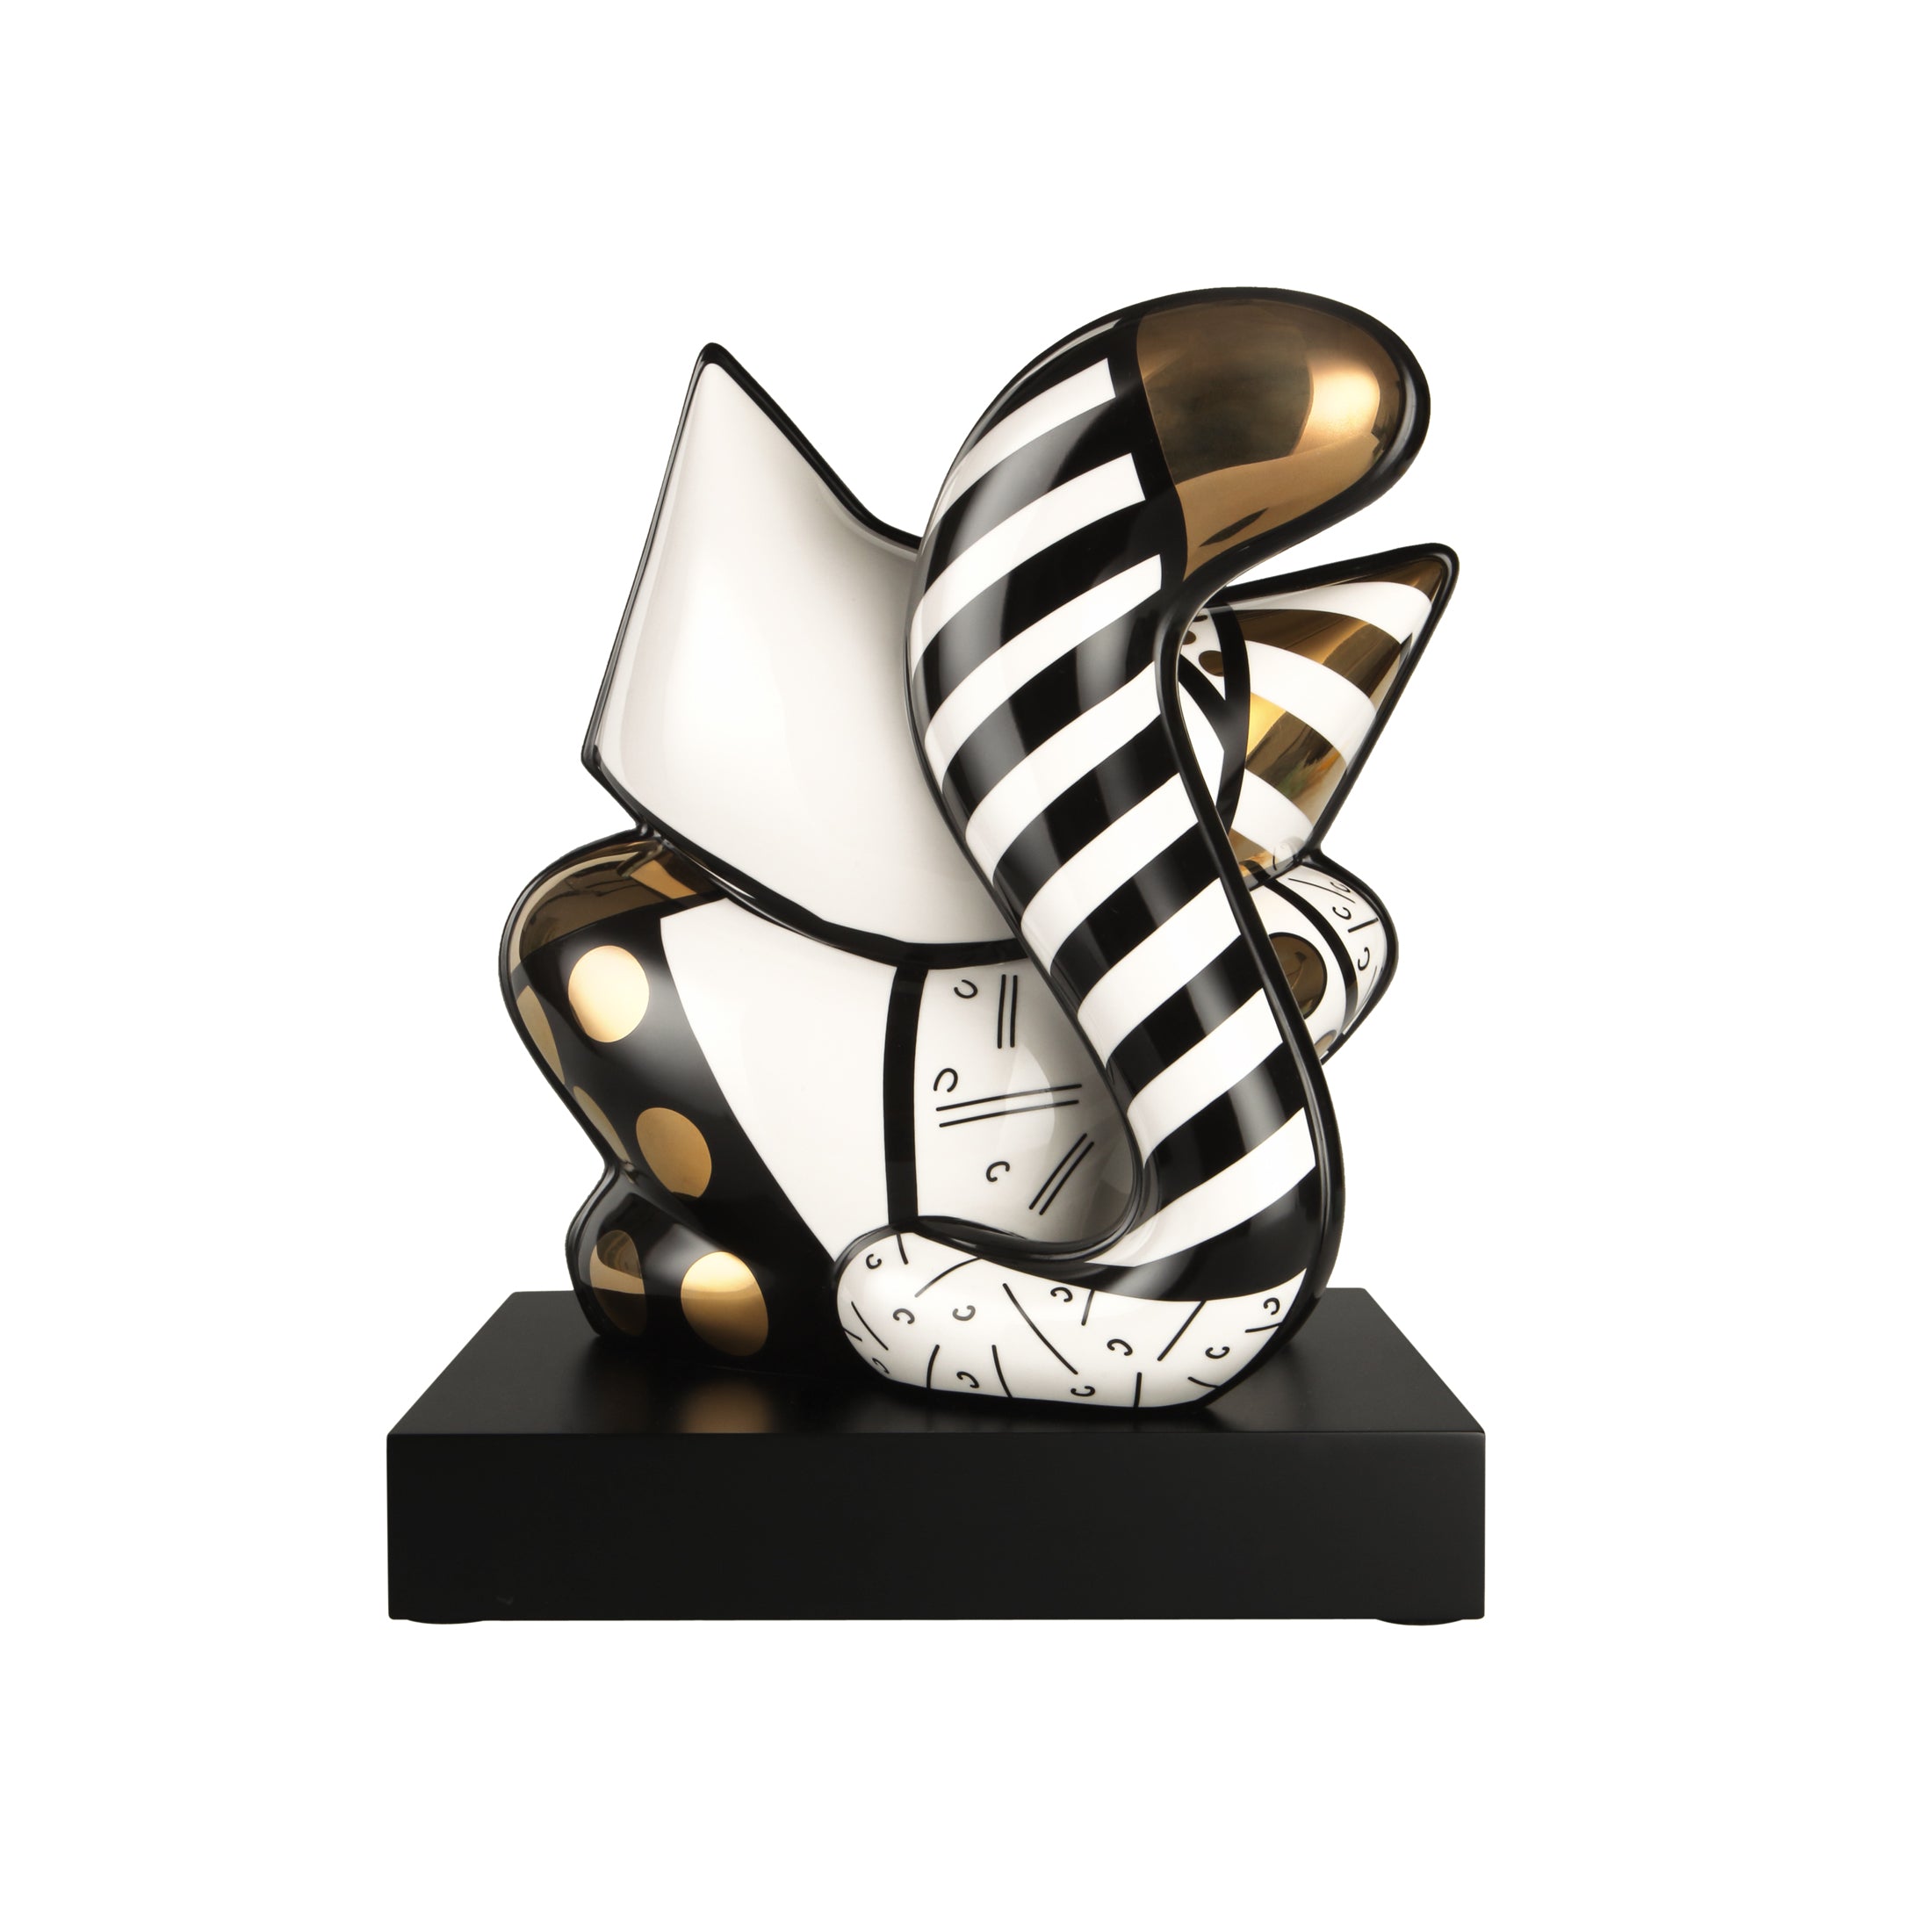 Goebel by Britto Figur "Golden Cat" (limited edition)